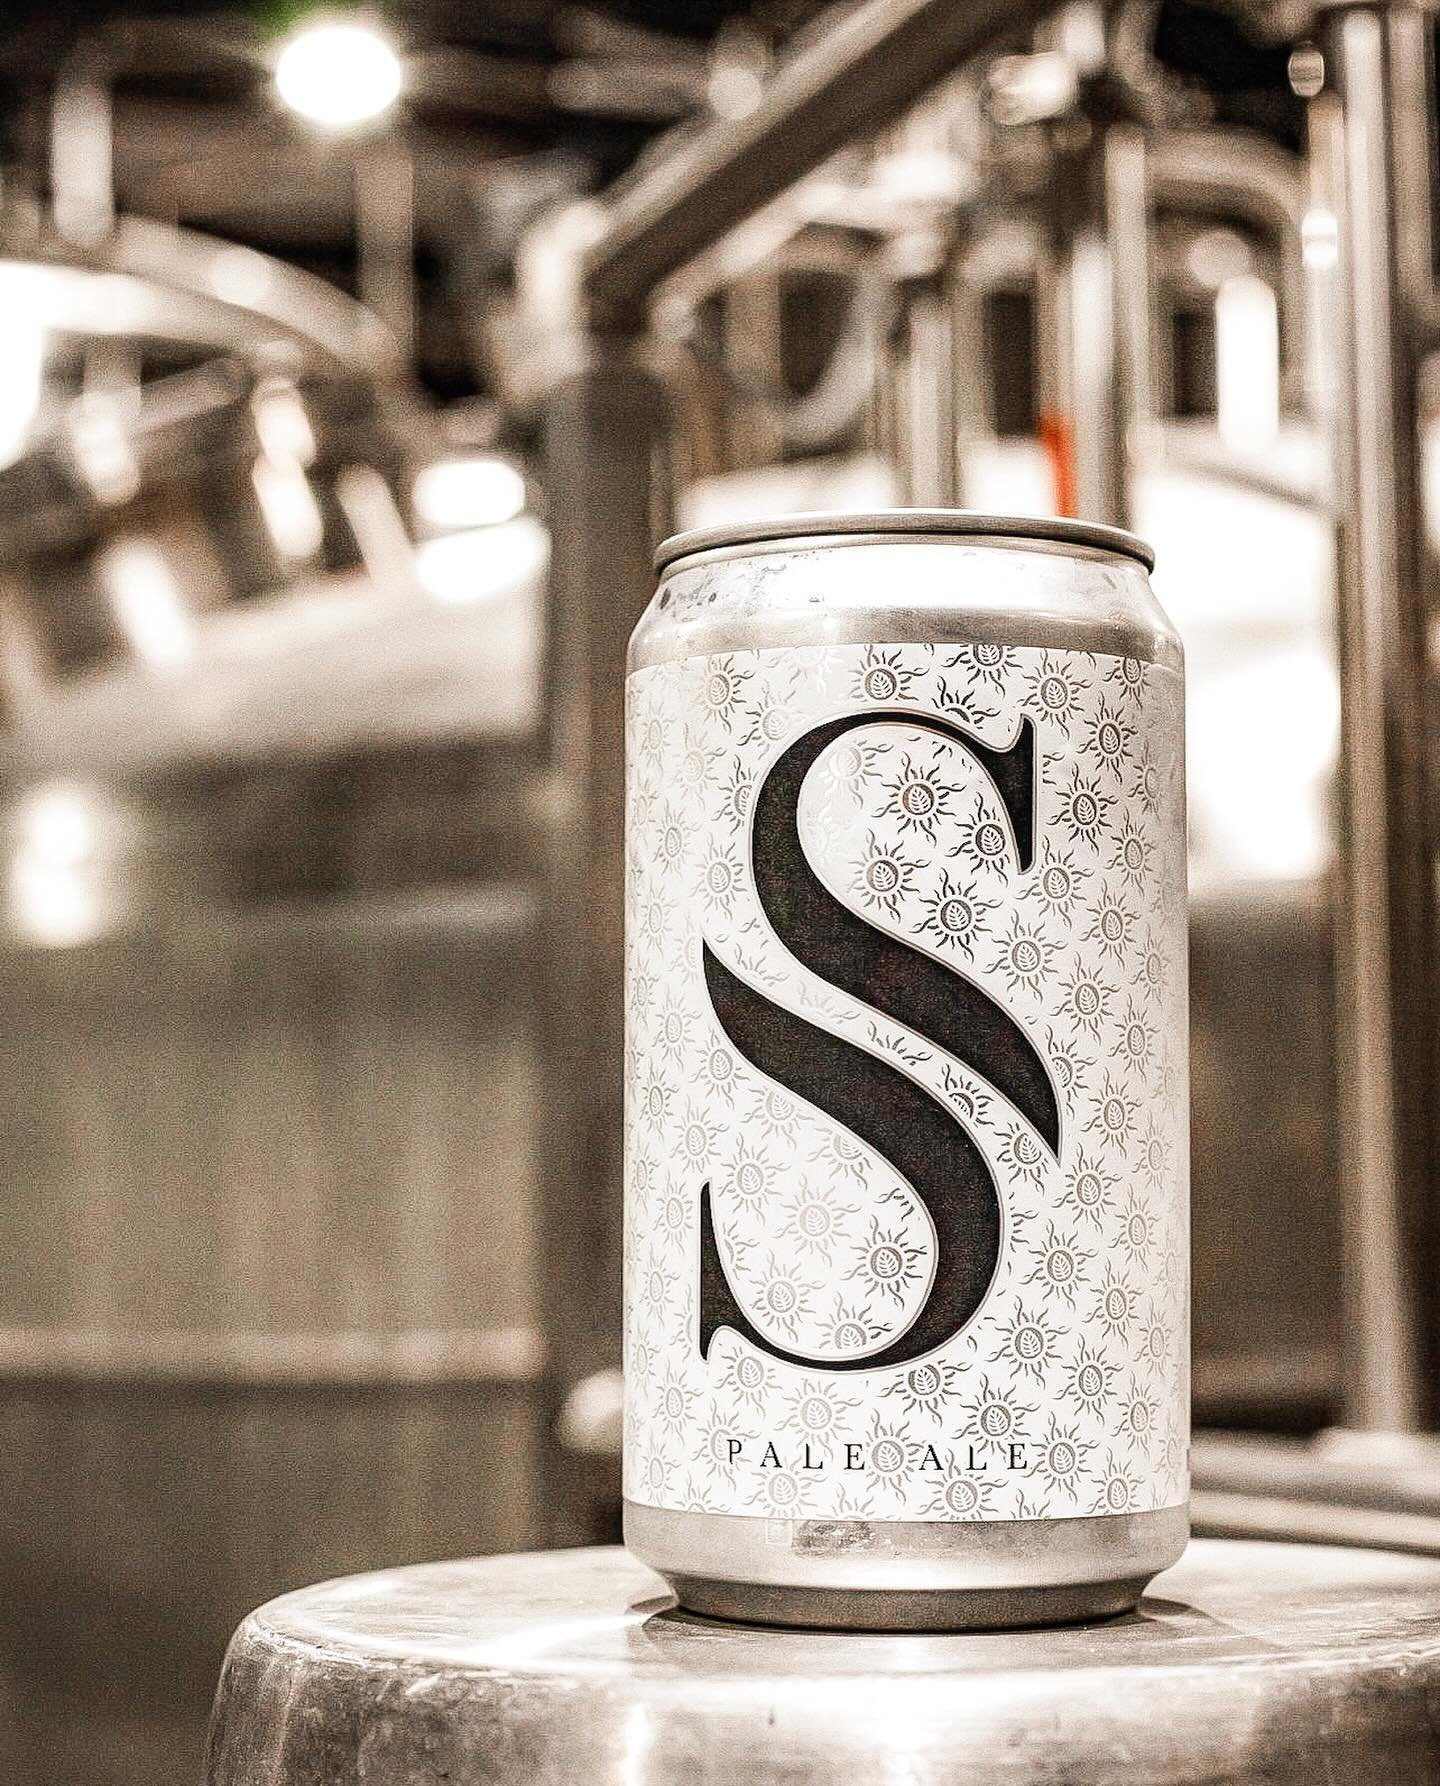 SCARS Pale Ale is back on tap and in crowlers to go for #MentalHealthAwarenessMonth and for the Metal Health for Mental Health event at @lupulin_brewing in Big Lake, MN today!

#thescarsfoundation #scarsfoundation #sullyerna #godsmack #mentalthhealth